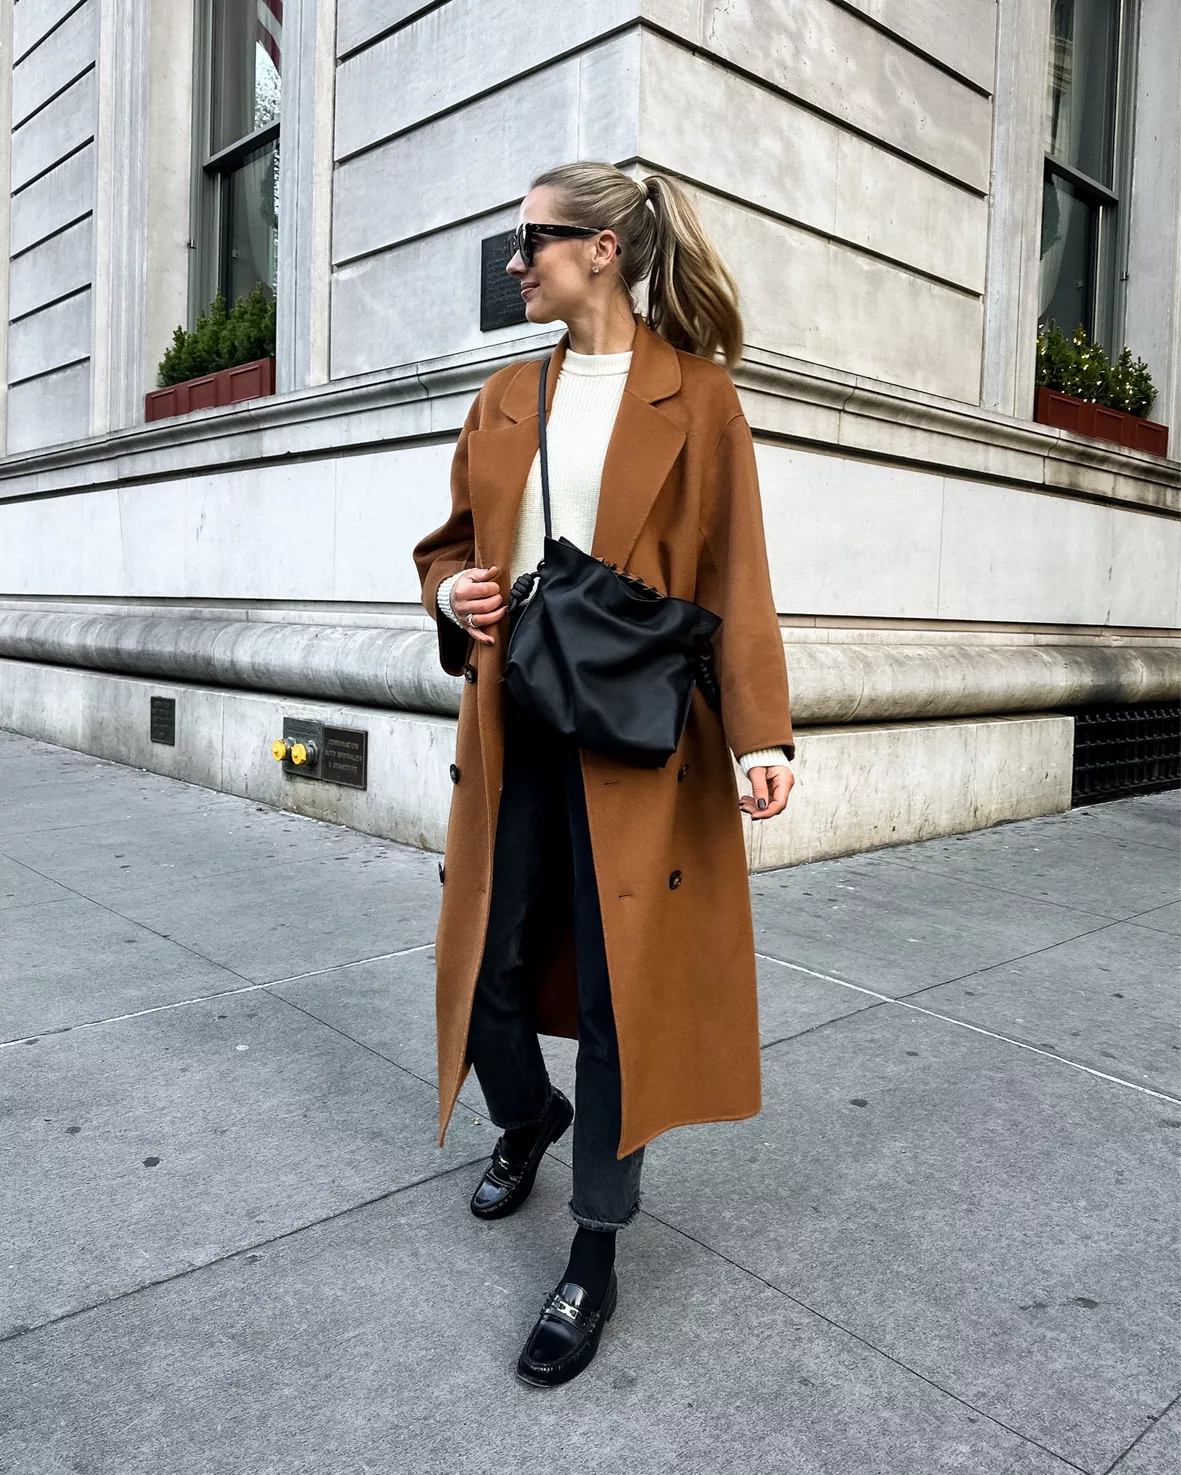 Fall Street Style in NYC - Fashion Jackson